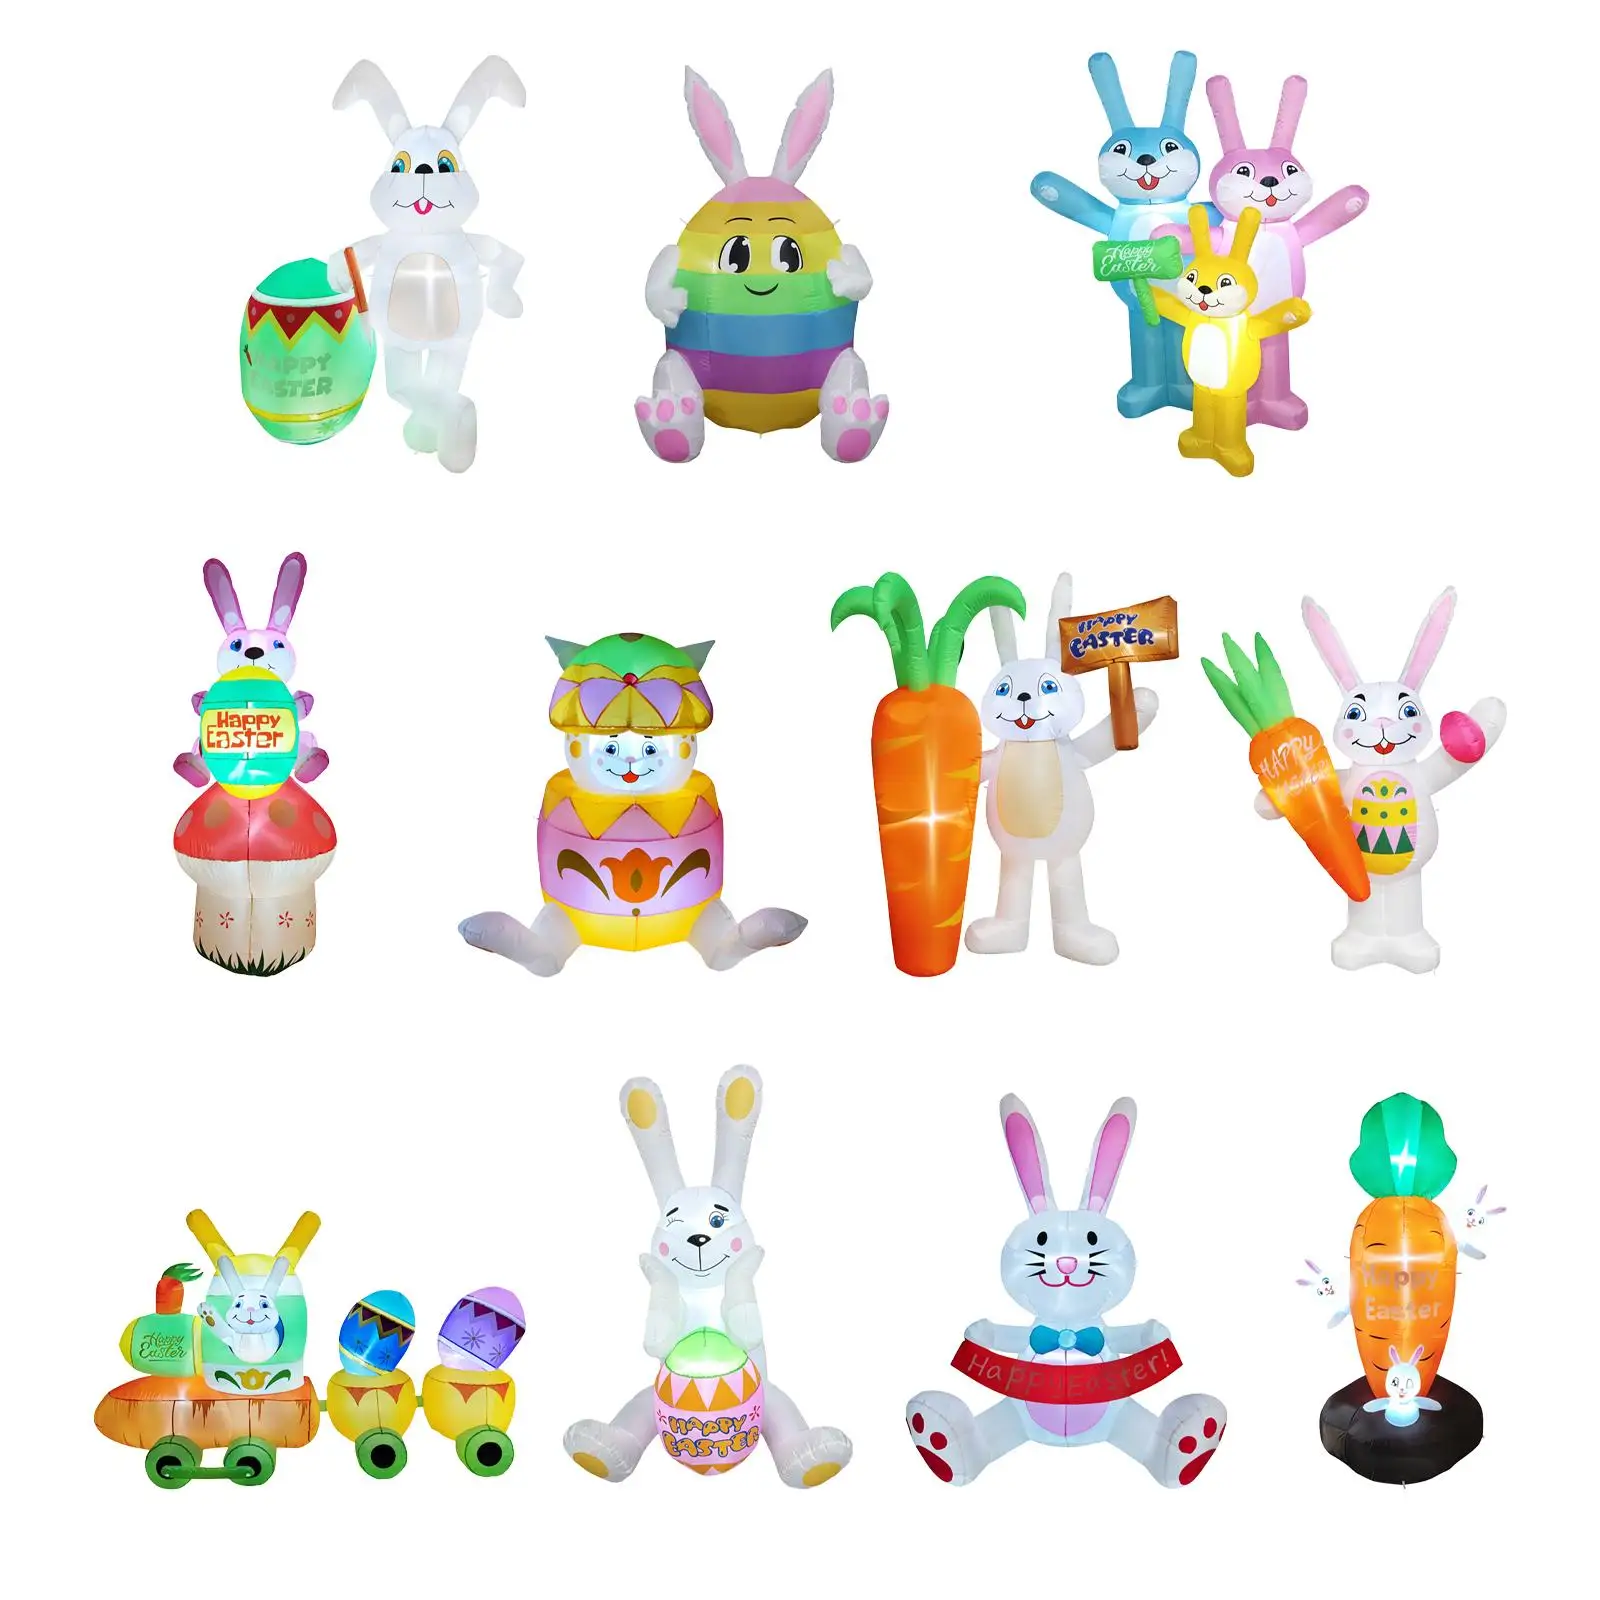 

Easter Inflatable Outdoor Decoration Light up Novelty Decorative with LED Lights Giant Inflatable Easter Bunny Easter Rabbit